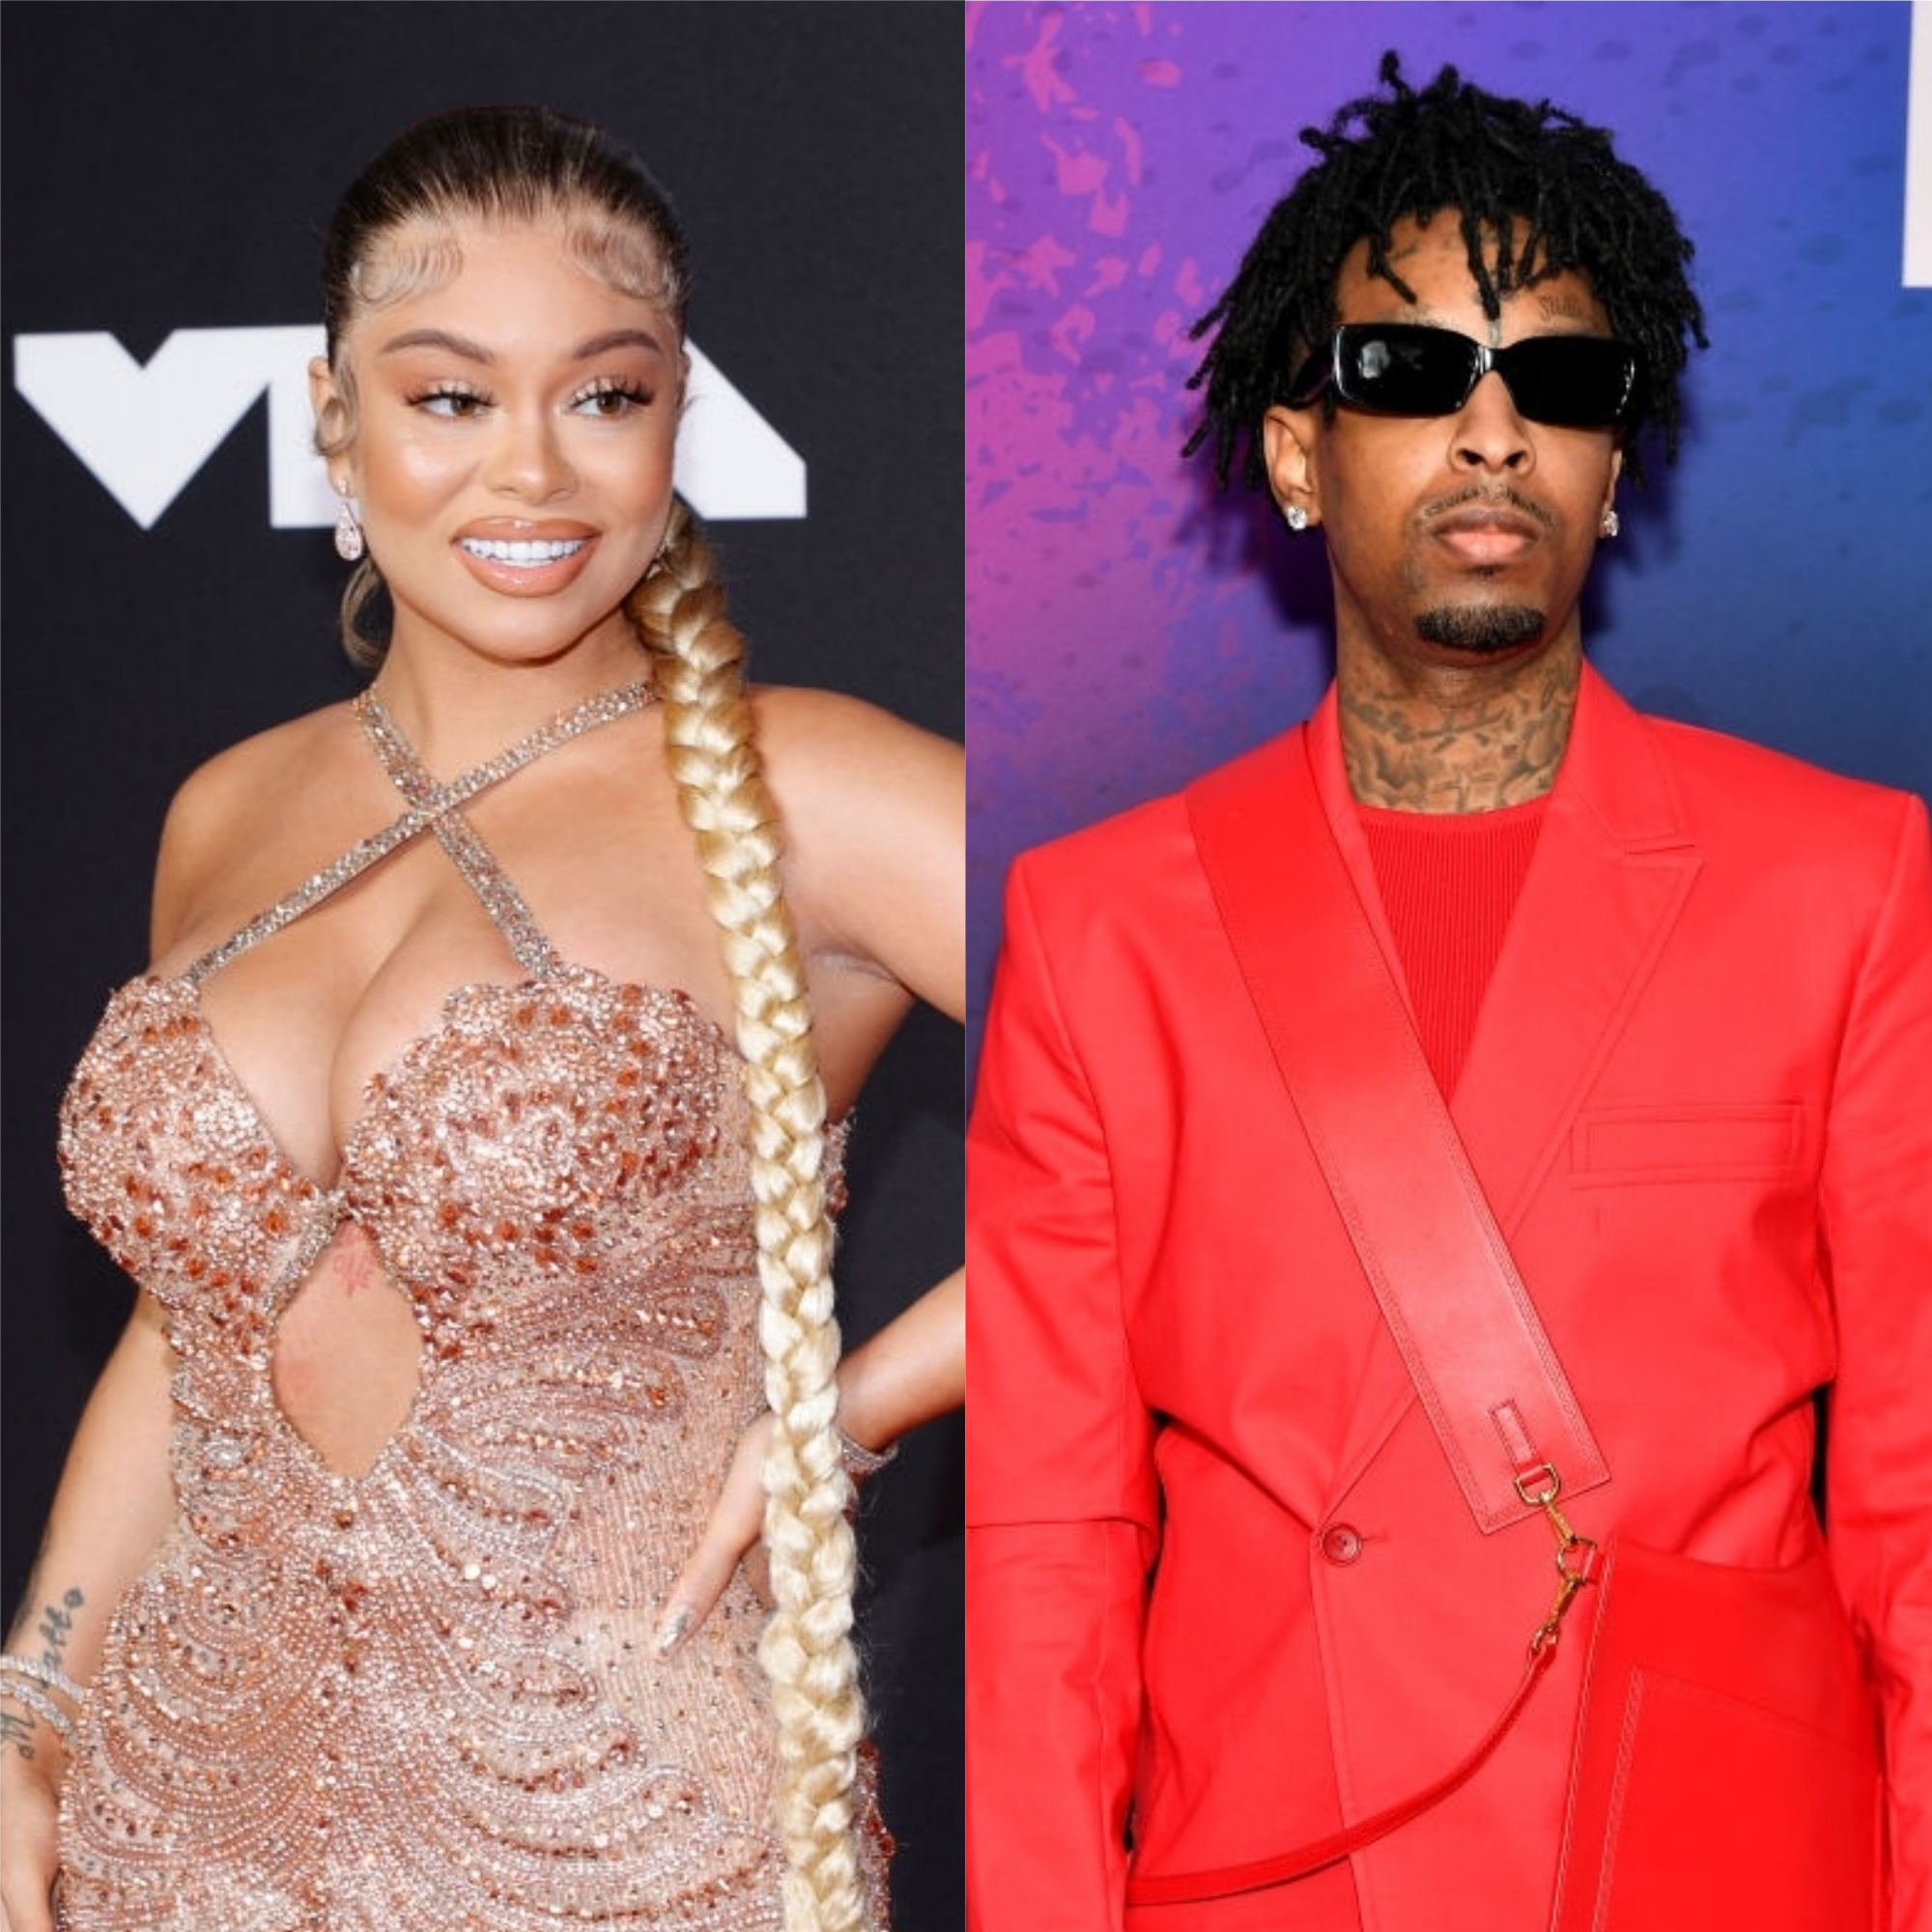 21 Savage's wife files for divorce over Latto affair. He may be deported  (Video)